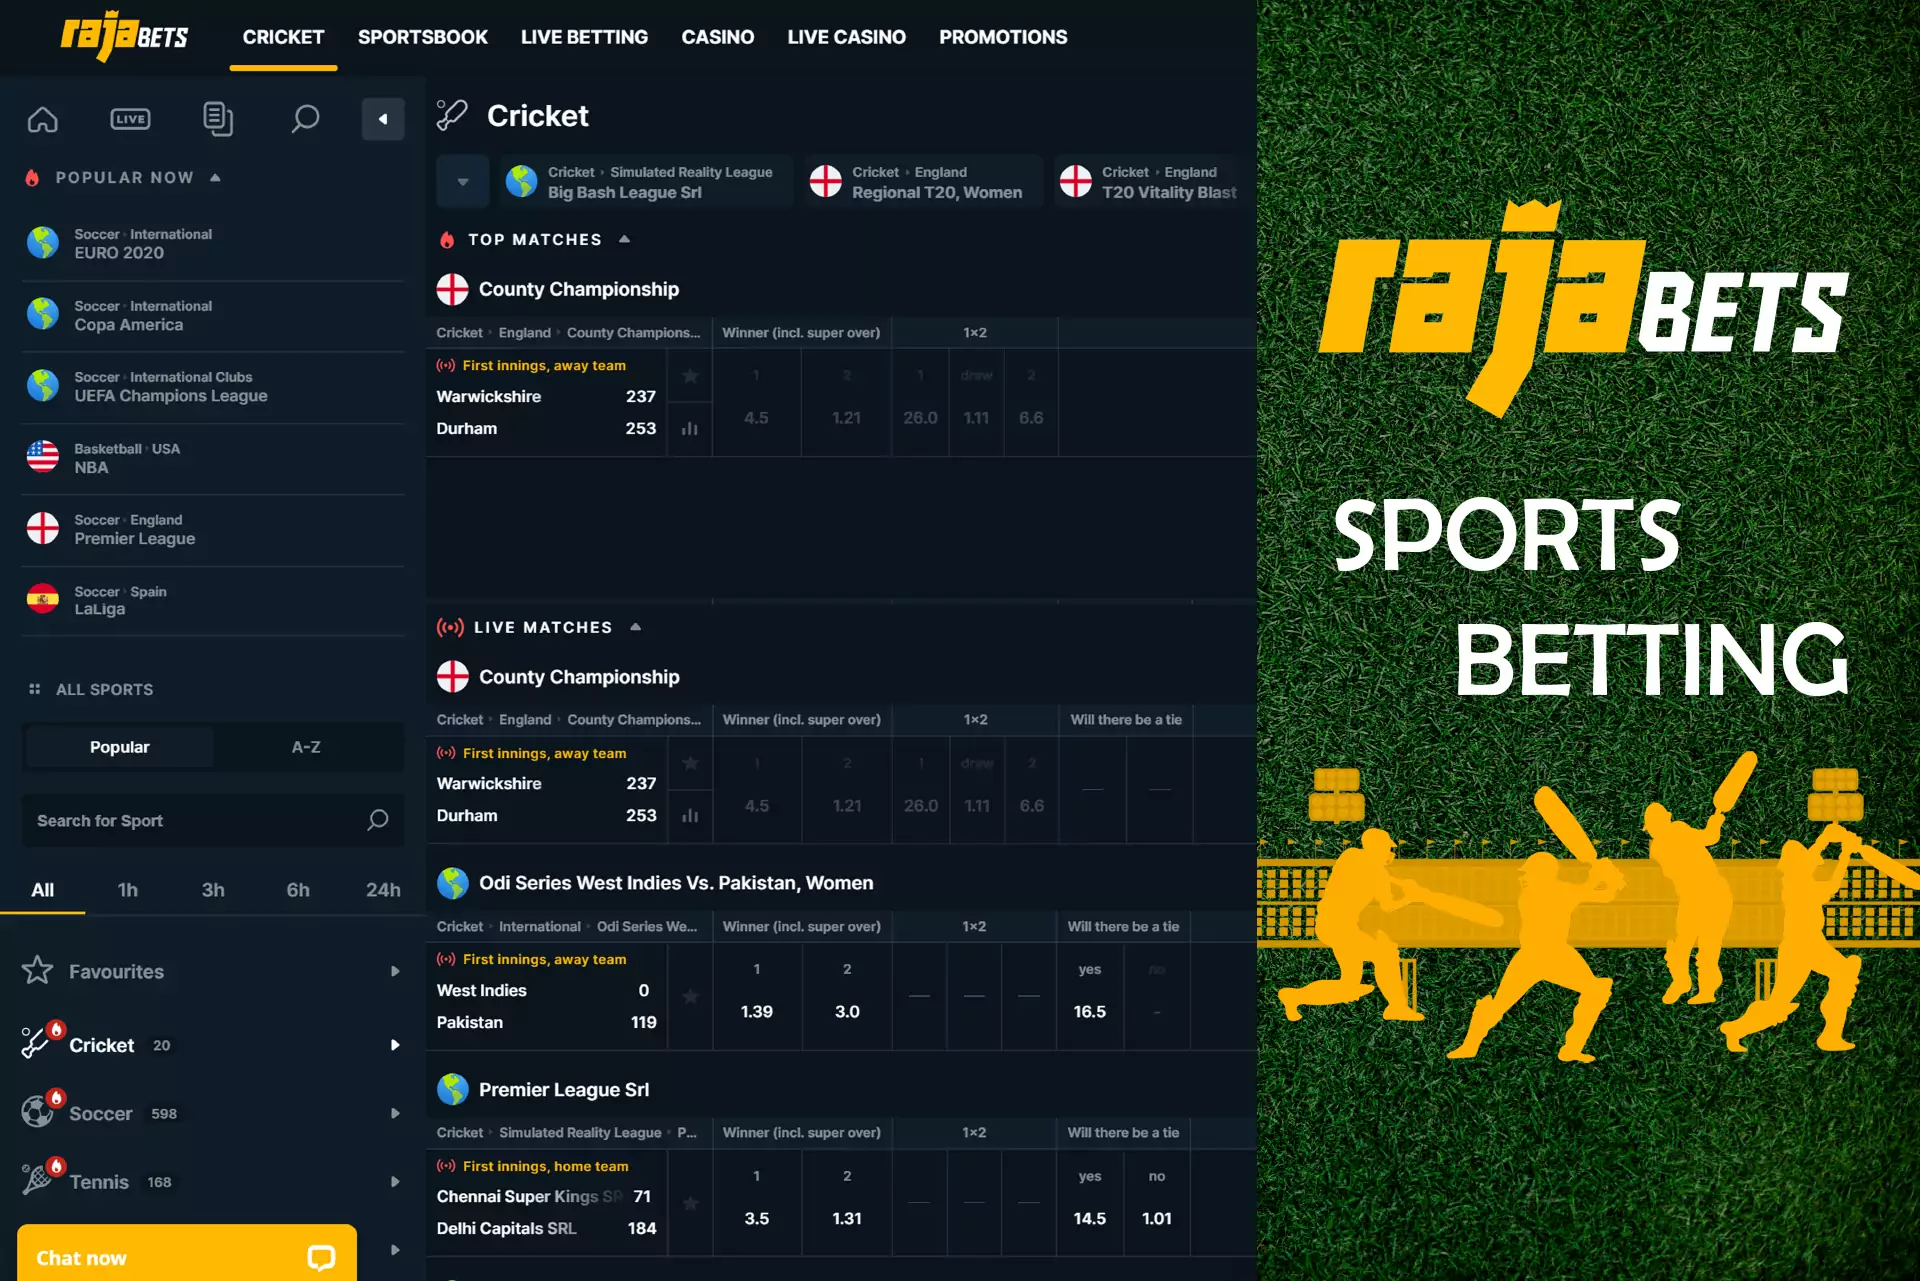 You can bet on cricket and other sports matches.